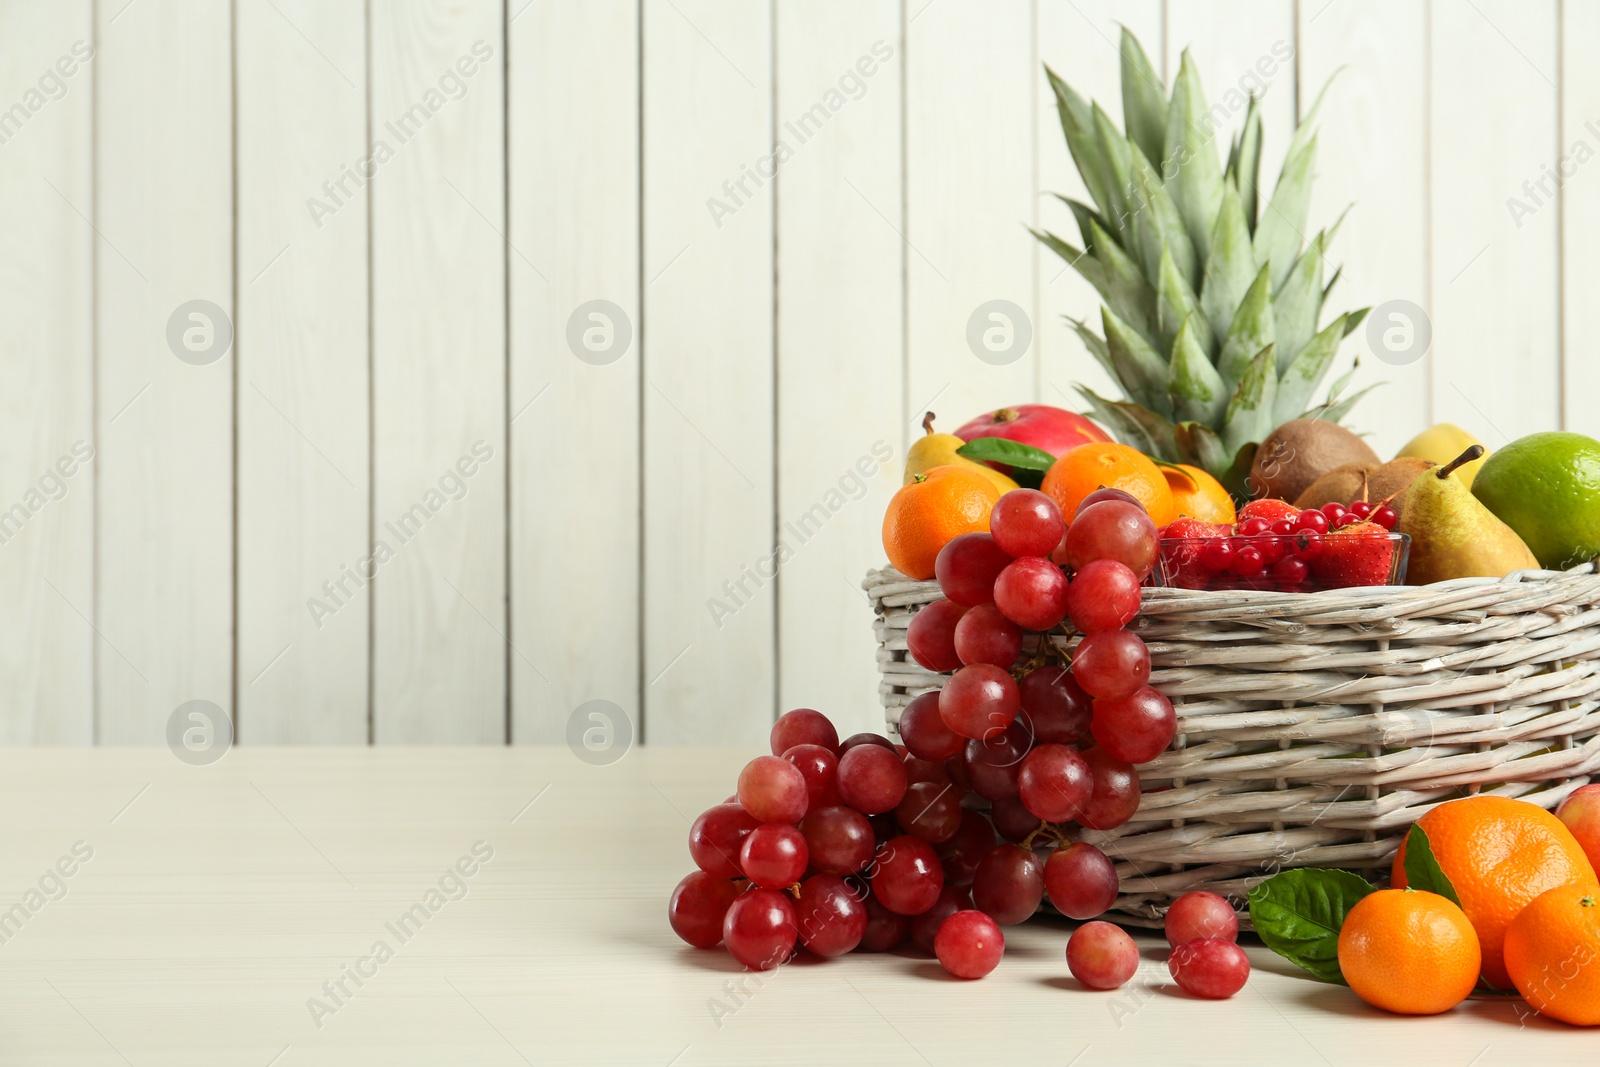 Photo of Wicker basket with different fresh fruits on white wooden table. Space for text